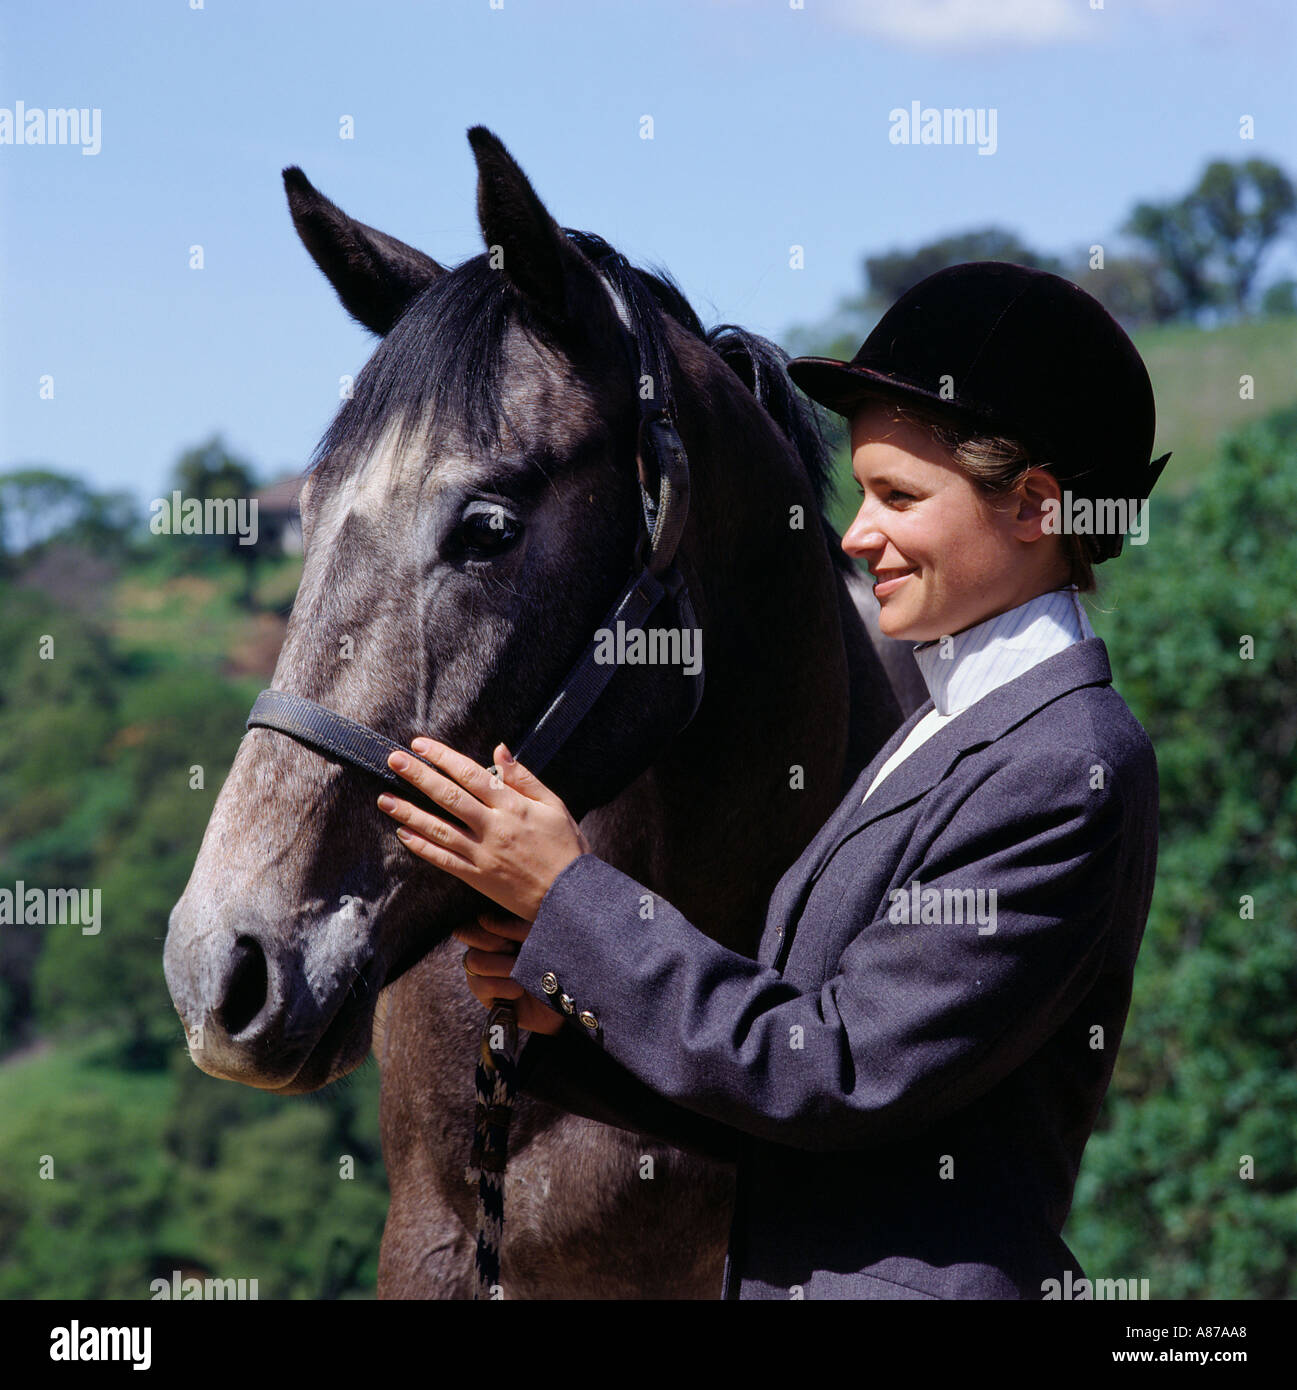 A smiling young woman in a formal gray riders outfit and black helmet strokes the face of her horse as she holds its bridle Stock Photo